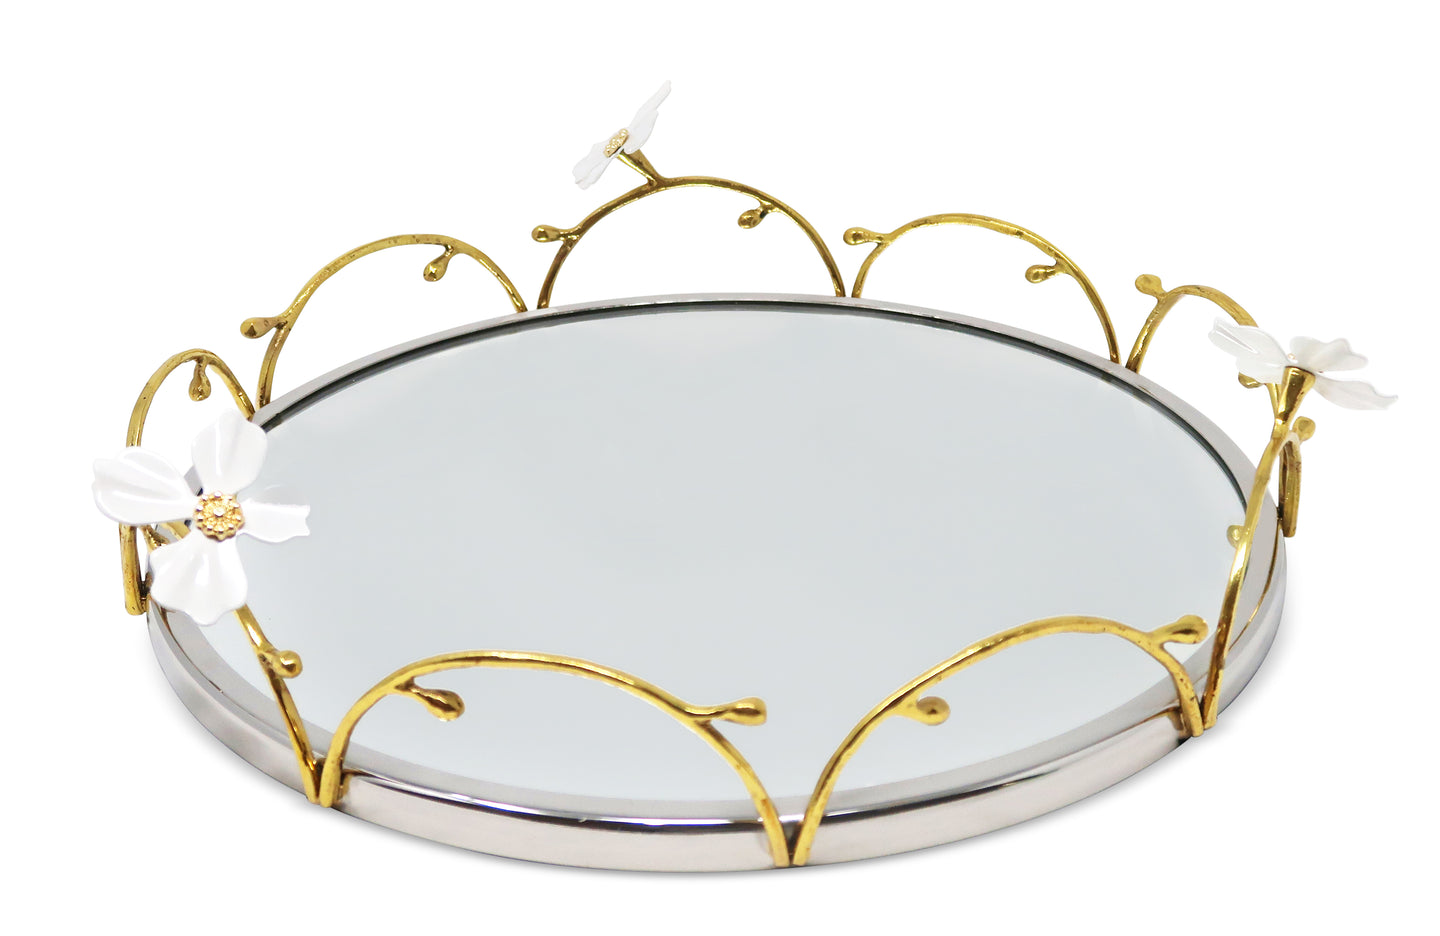 Gold Loop Round Tray with Jewel Flowers Design, 13